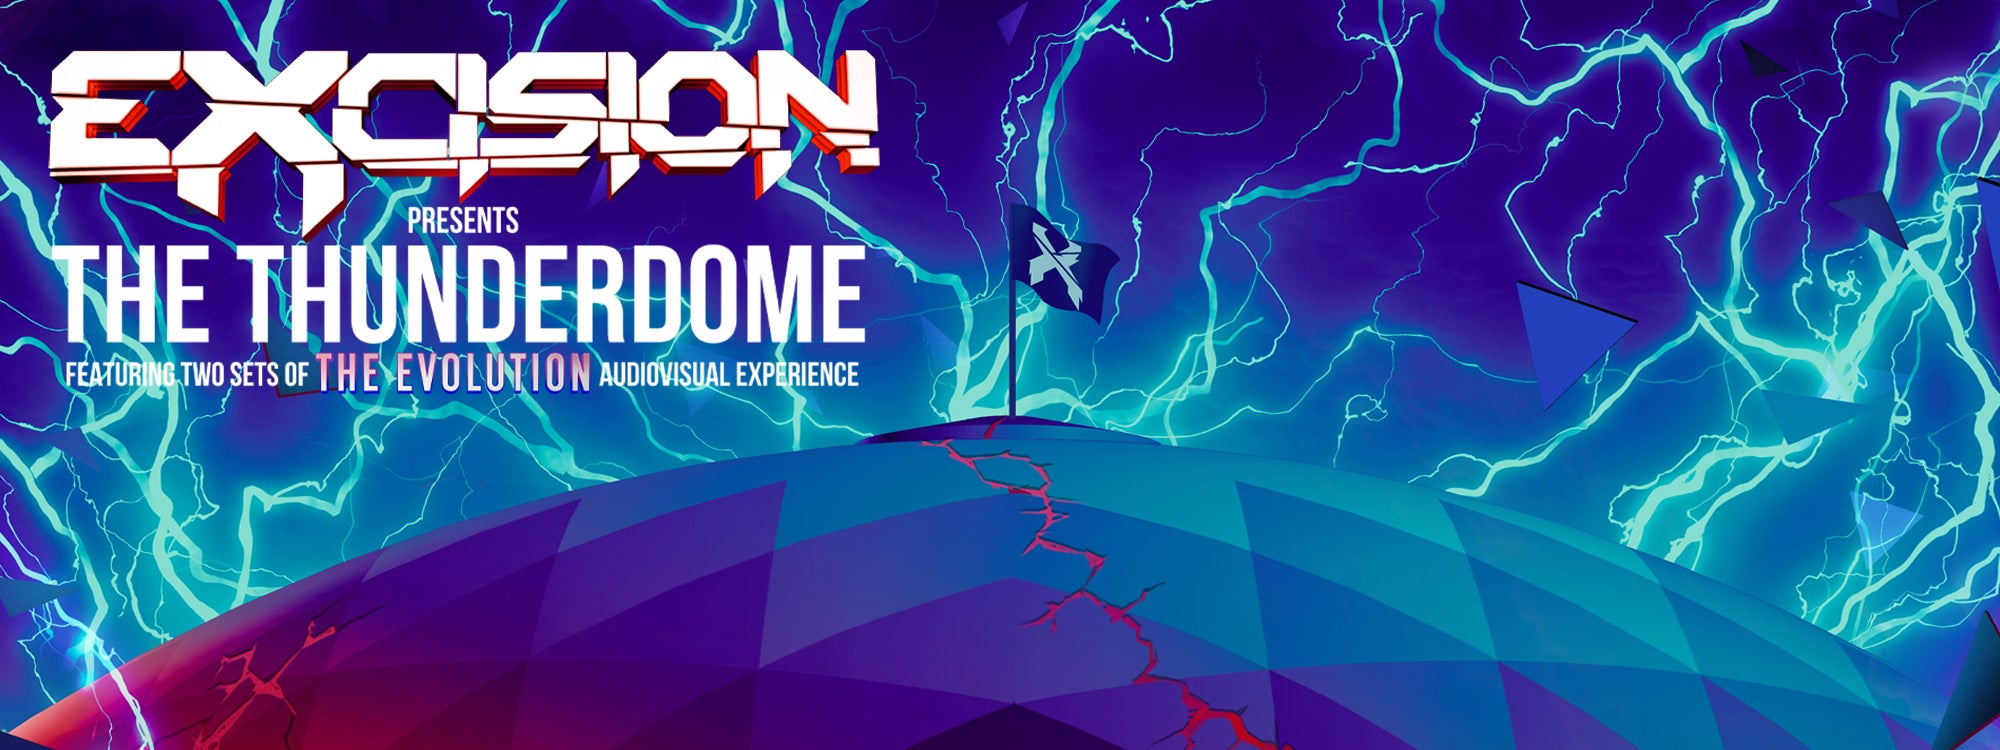 Excision Presents: The Thunderdome